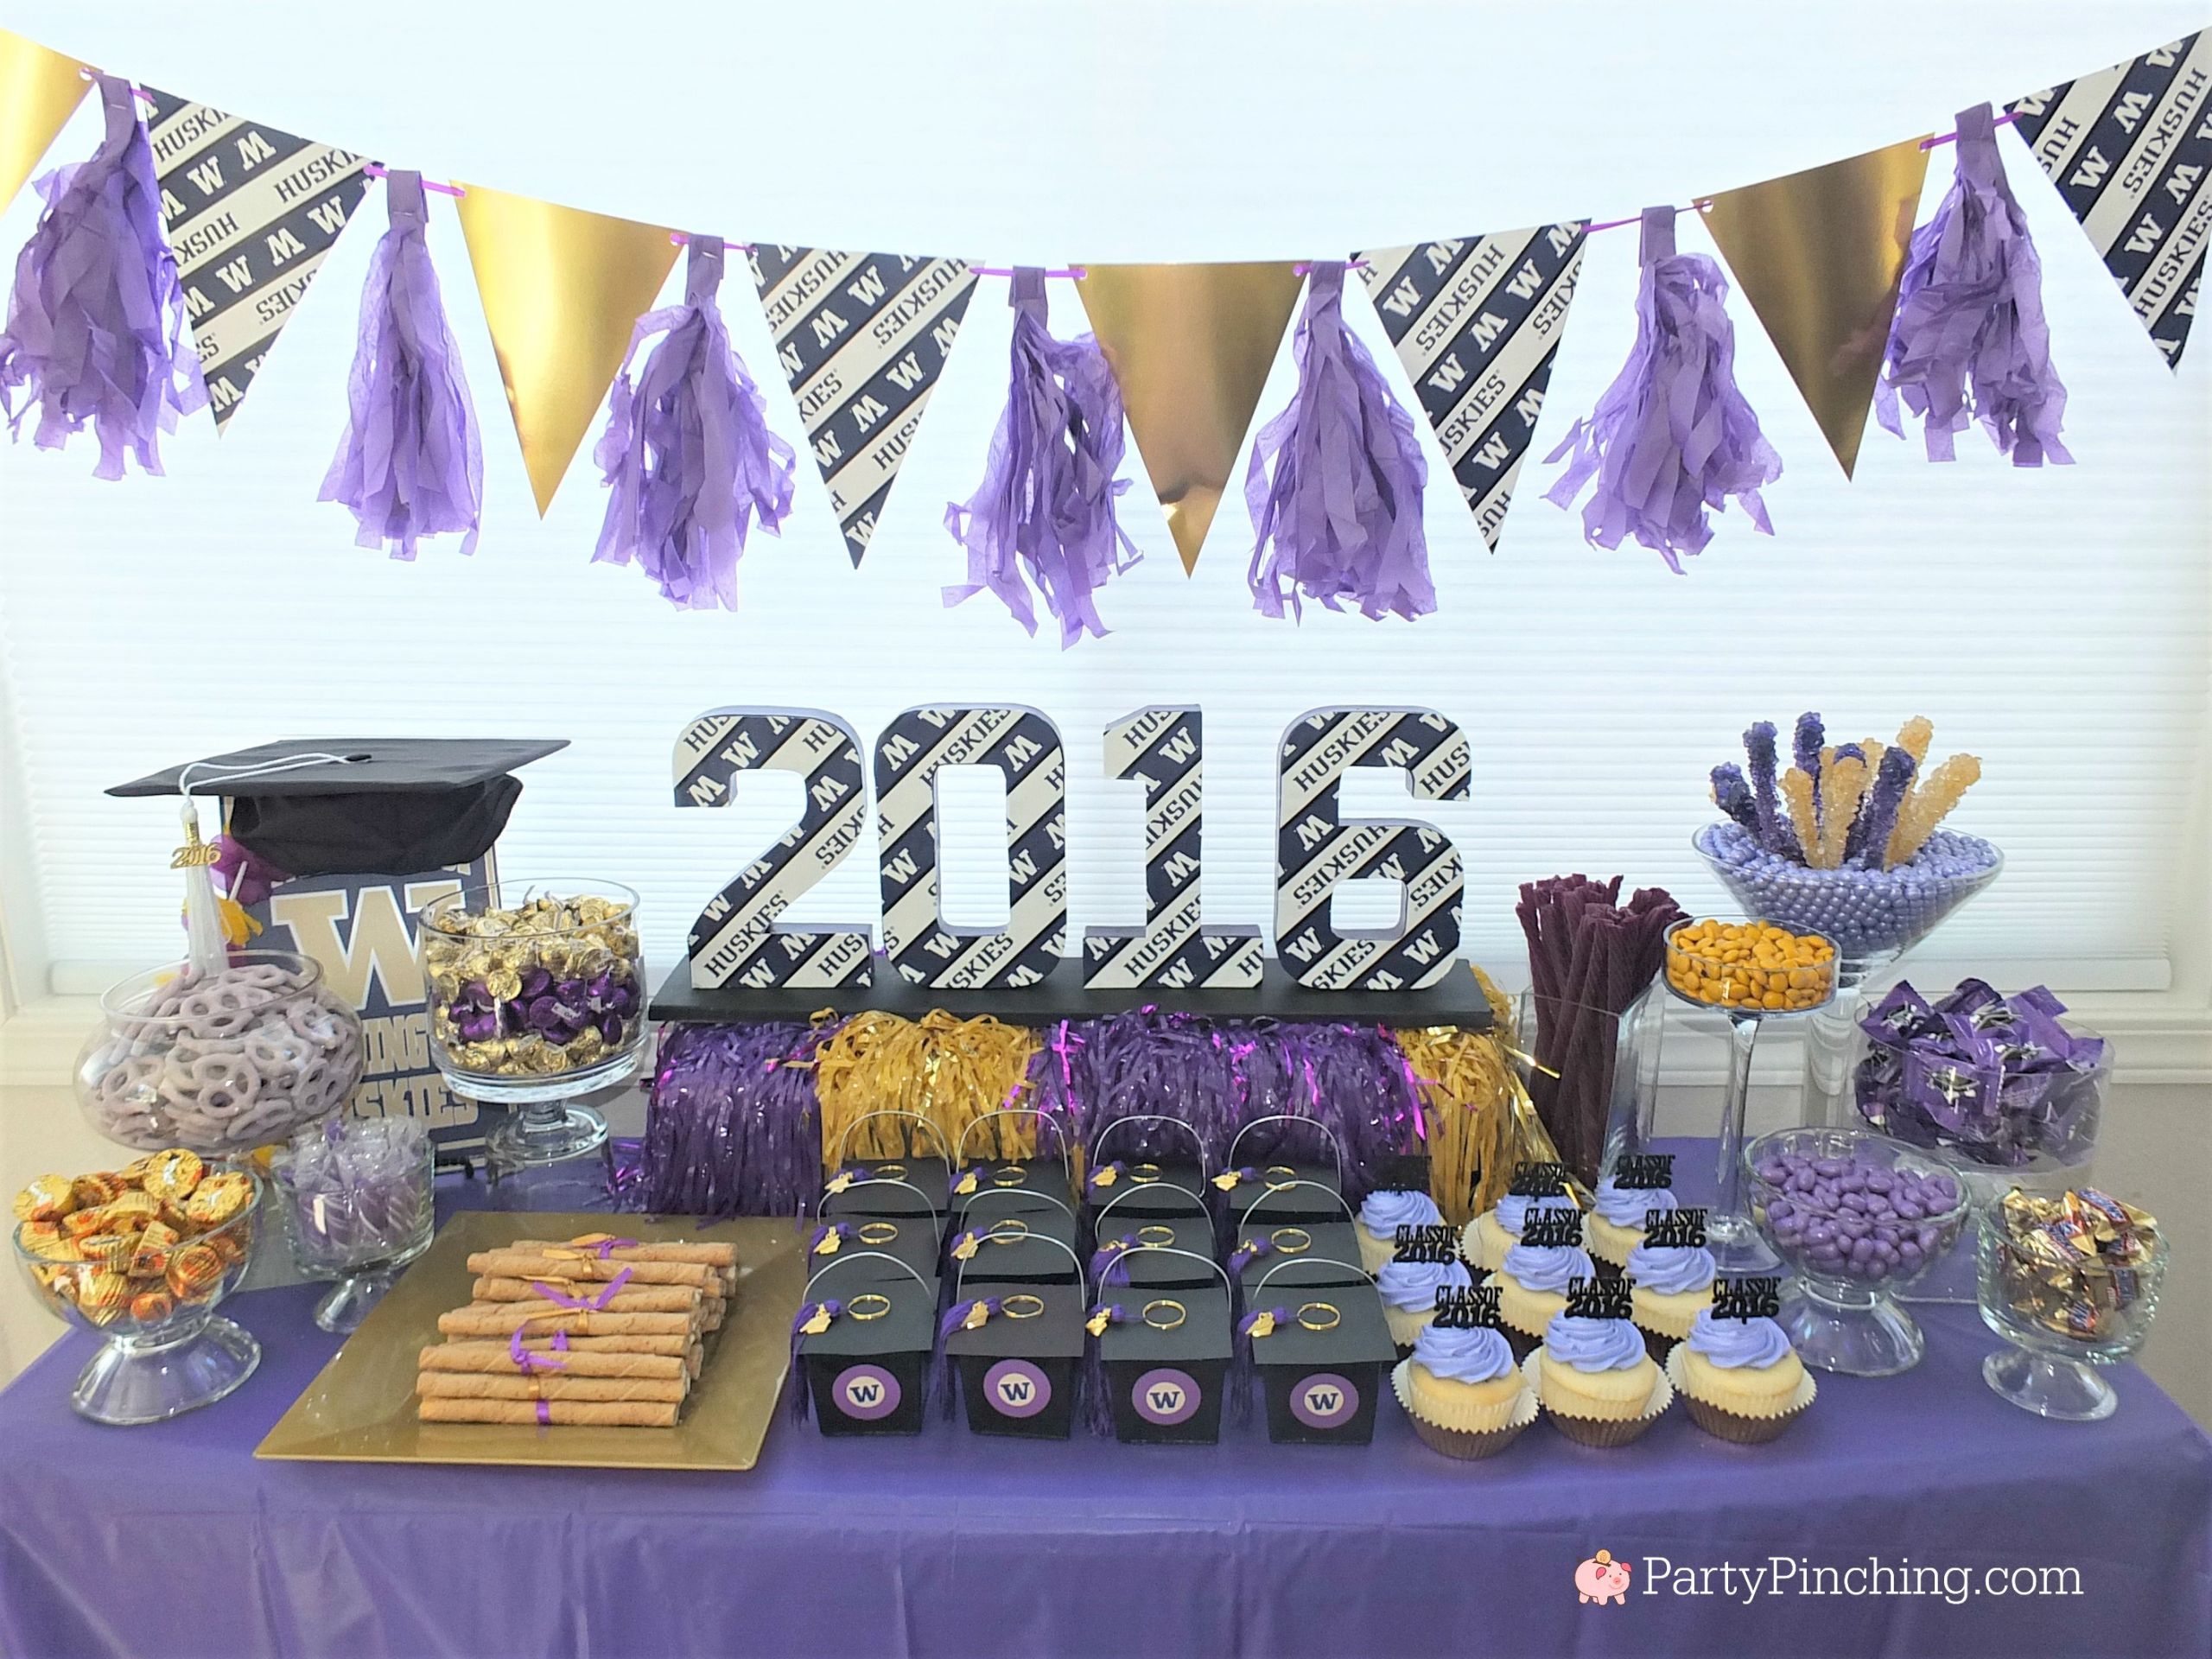 Candy Buffet Ideas For Graduation Party
 College Graduation Party Graduation Party Ideas 2020